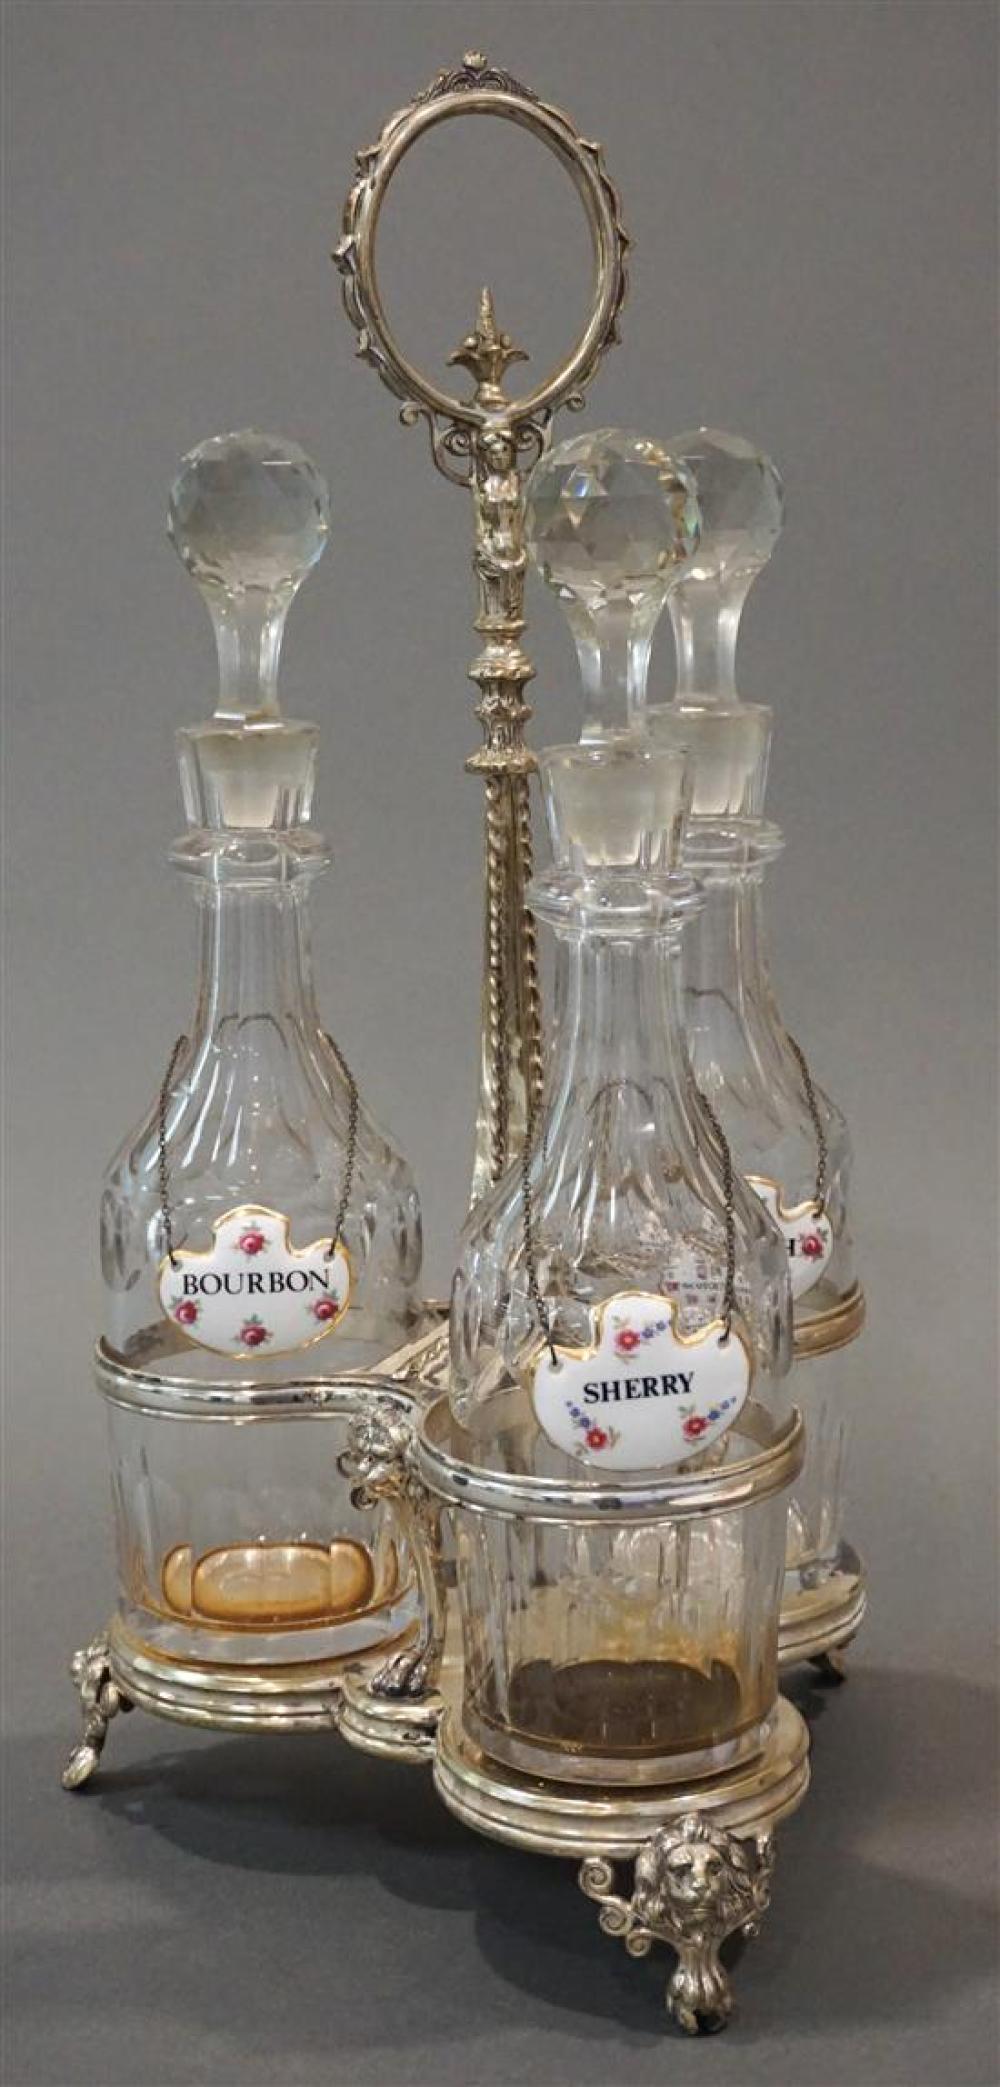 THREE CRYSTAL DECANTERS IN A SILVERPLATE